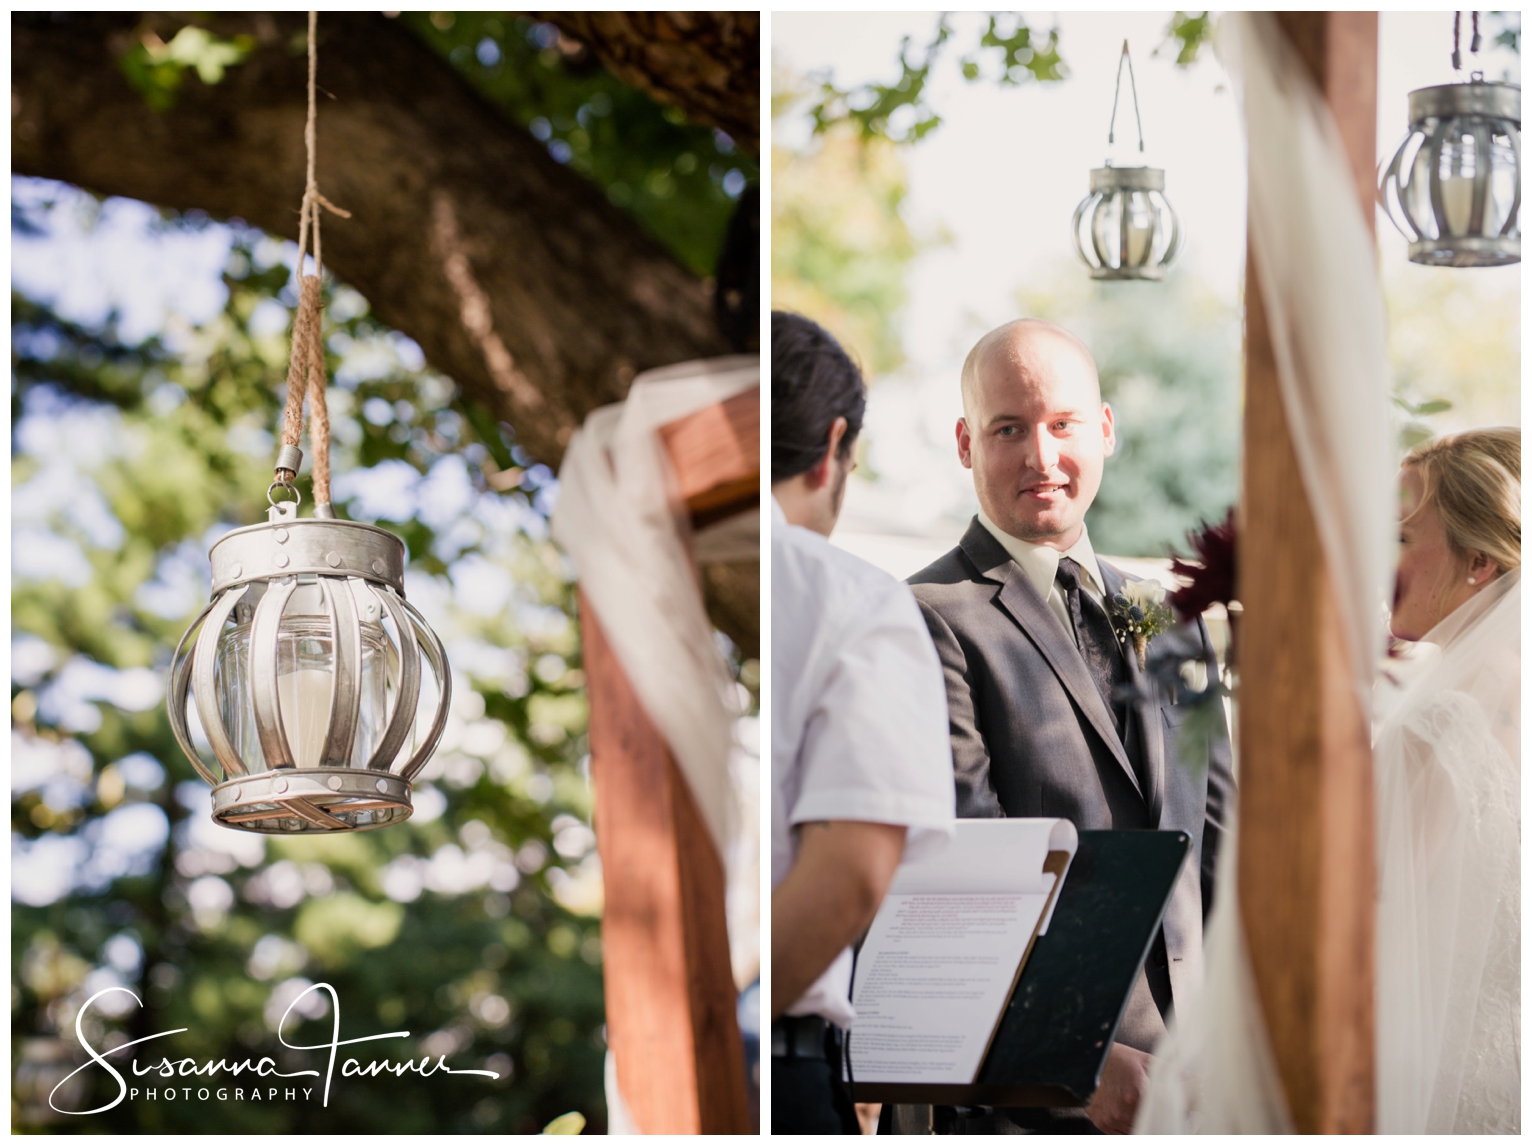 Indianapolis Outdoor Wedding, close up of lanterns hanging from trees at ceremony site and groom looking at officiator